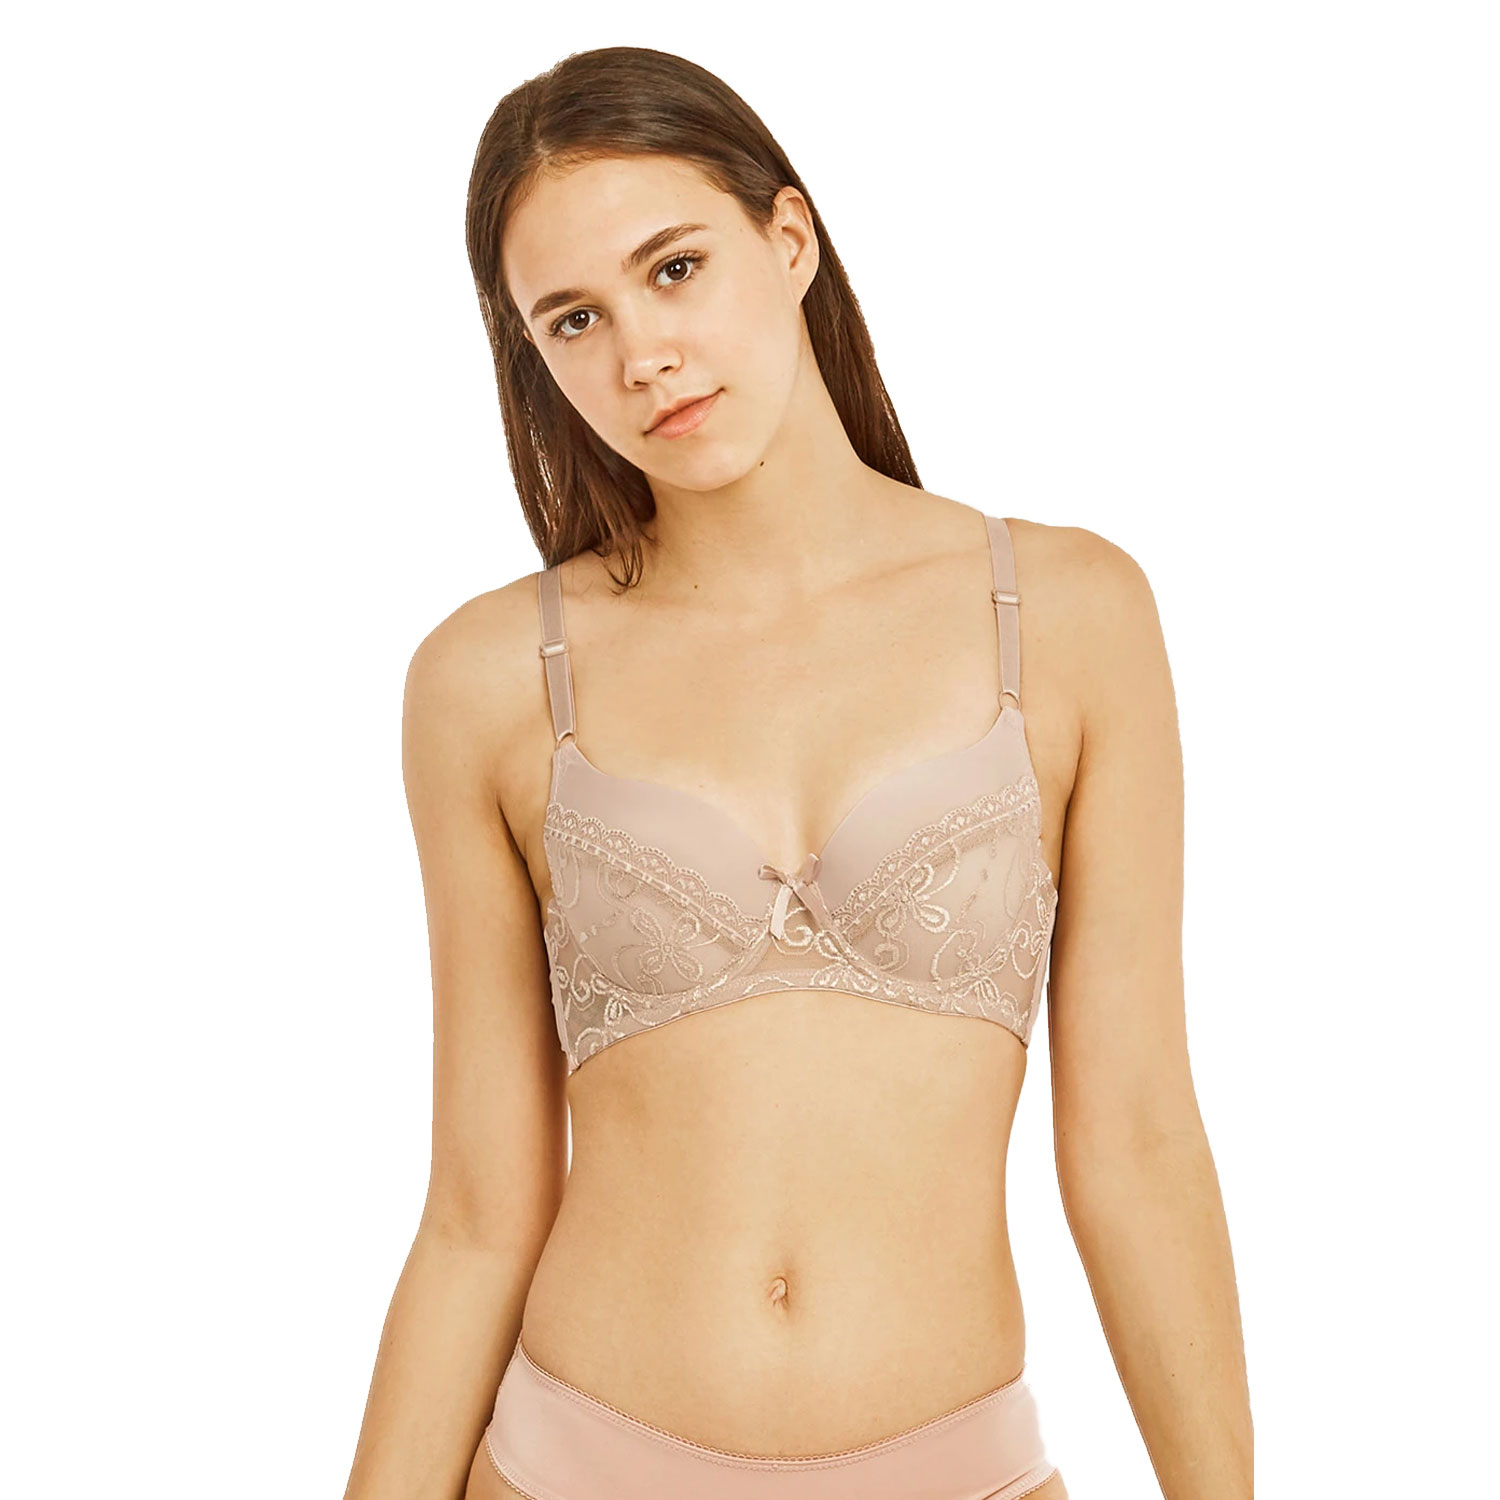  6 Pack Sofra Ladies Full Cup Plain Lace Bra